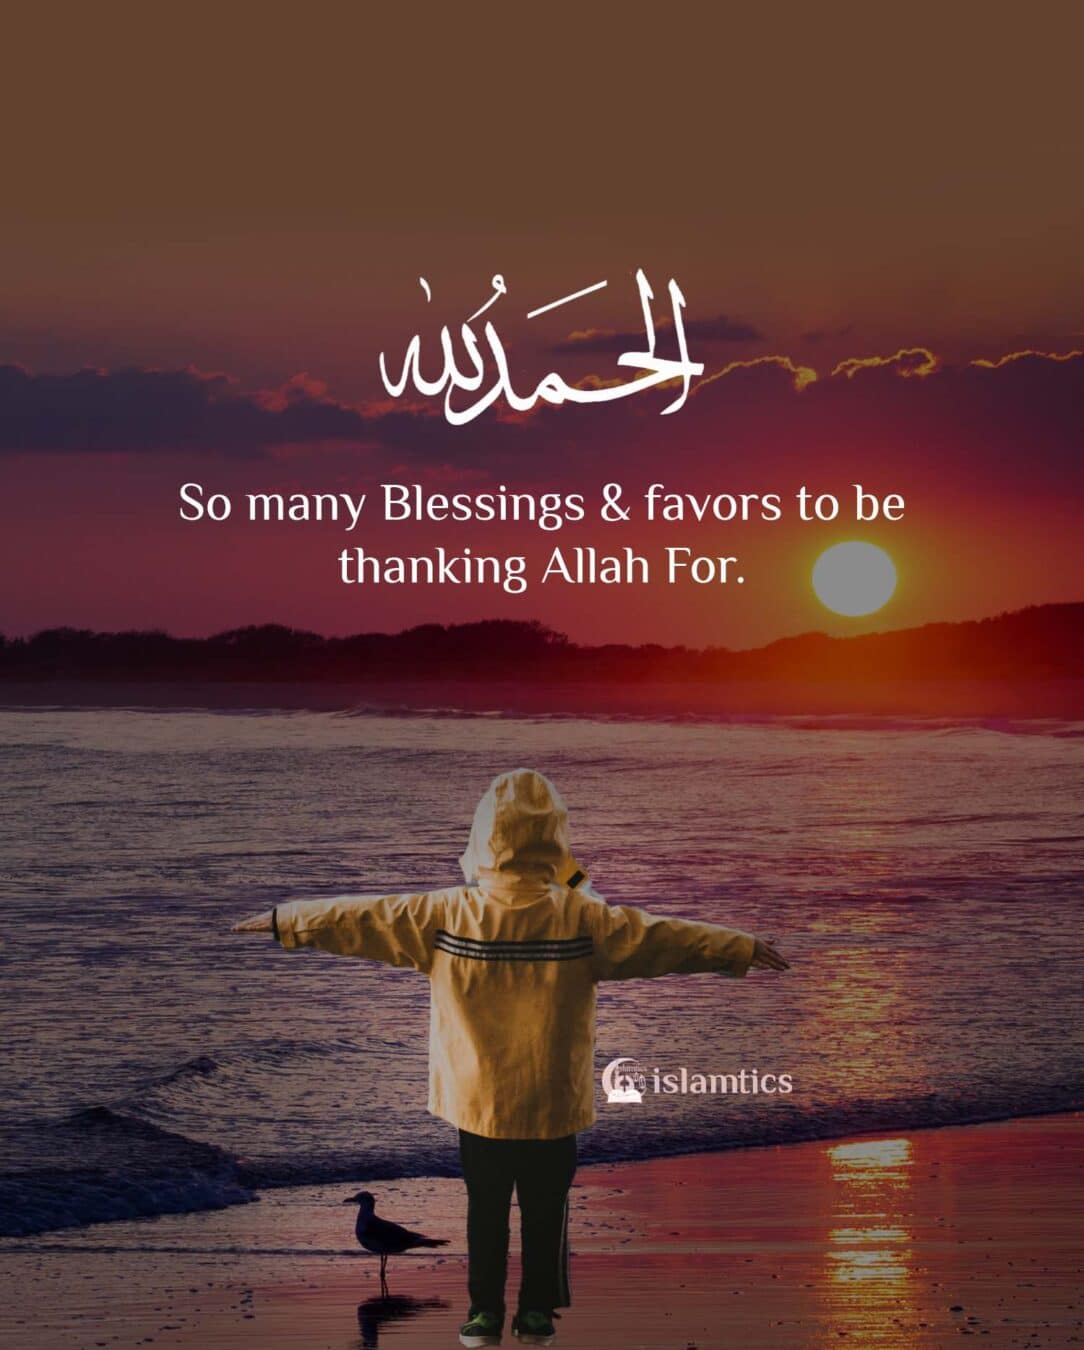 Alhamdulillah, So many Blessings & favors to be thanking Allah For.